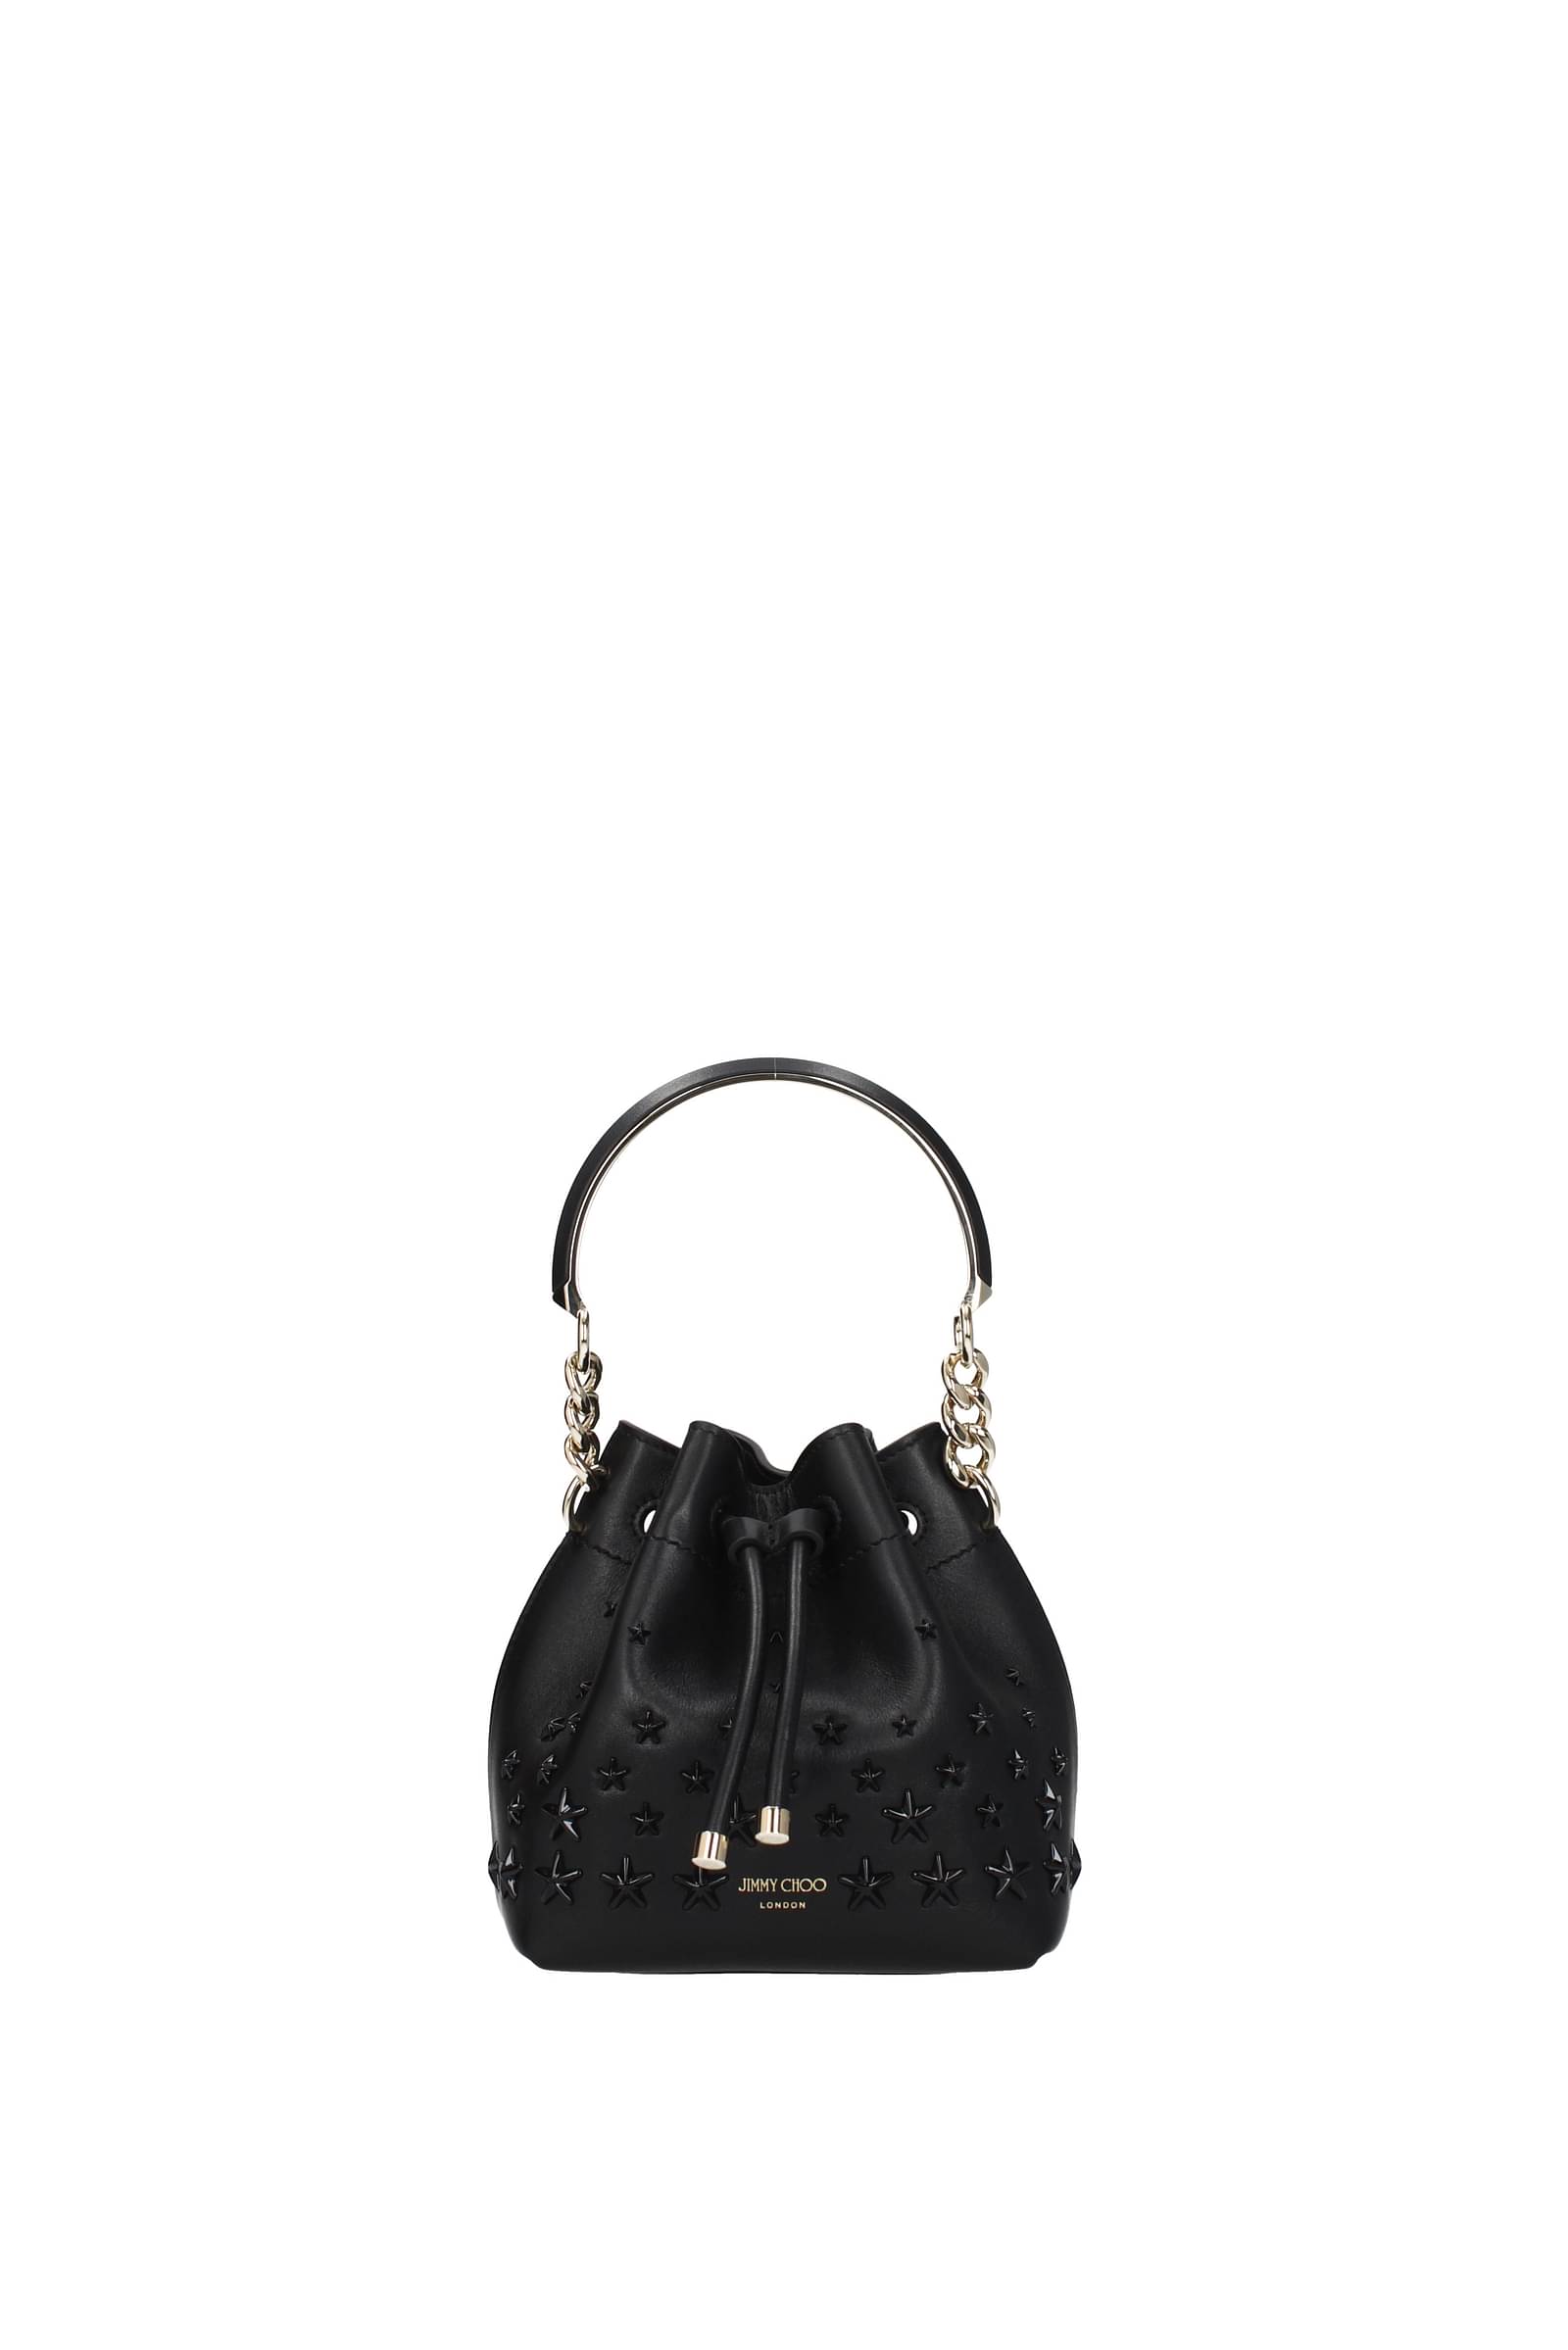 Buy Jimmy Choo Bags for Women Online - Fast Delivery to Azerbaijan.